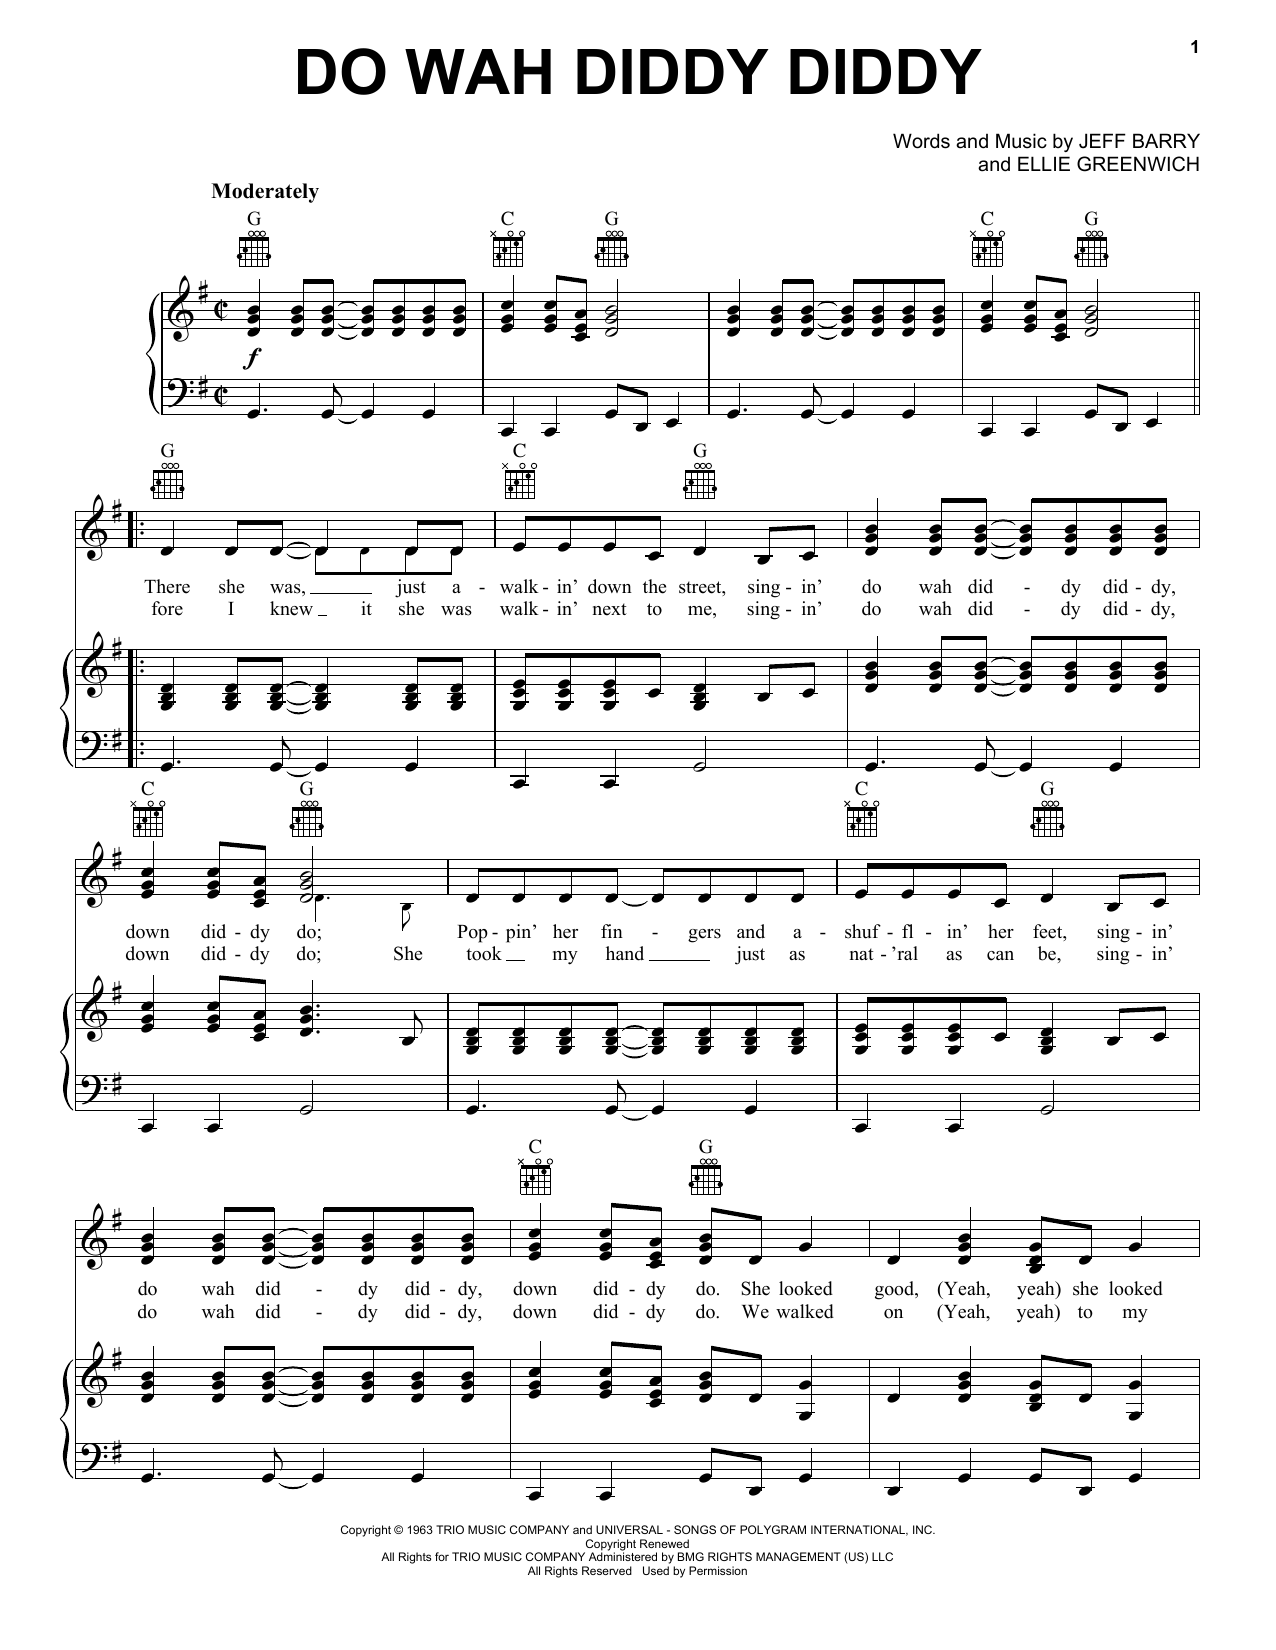 Manfred Mann Do Wah Diddy Diddy sheet music notes and chords. Download Printable PDF.